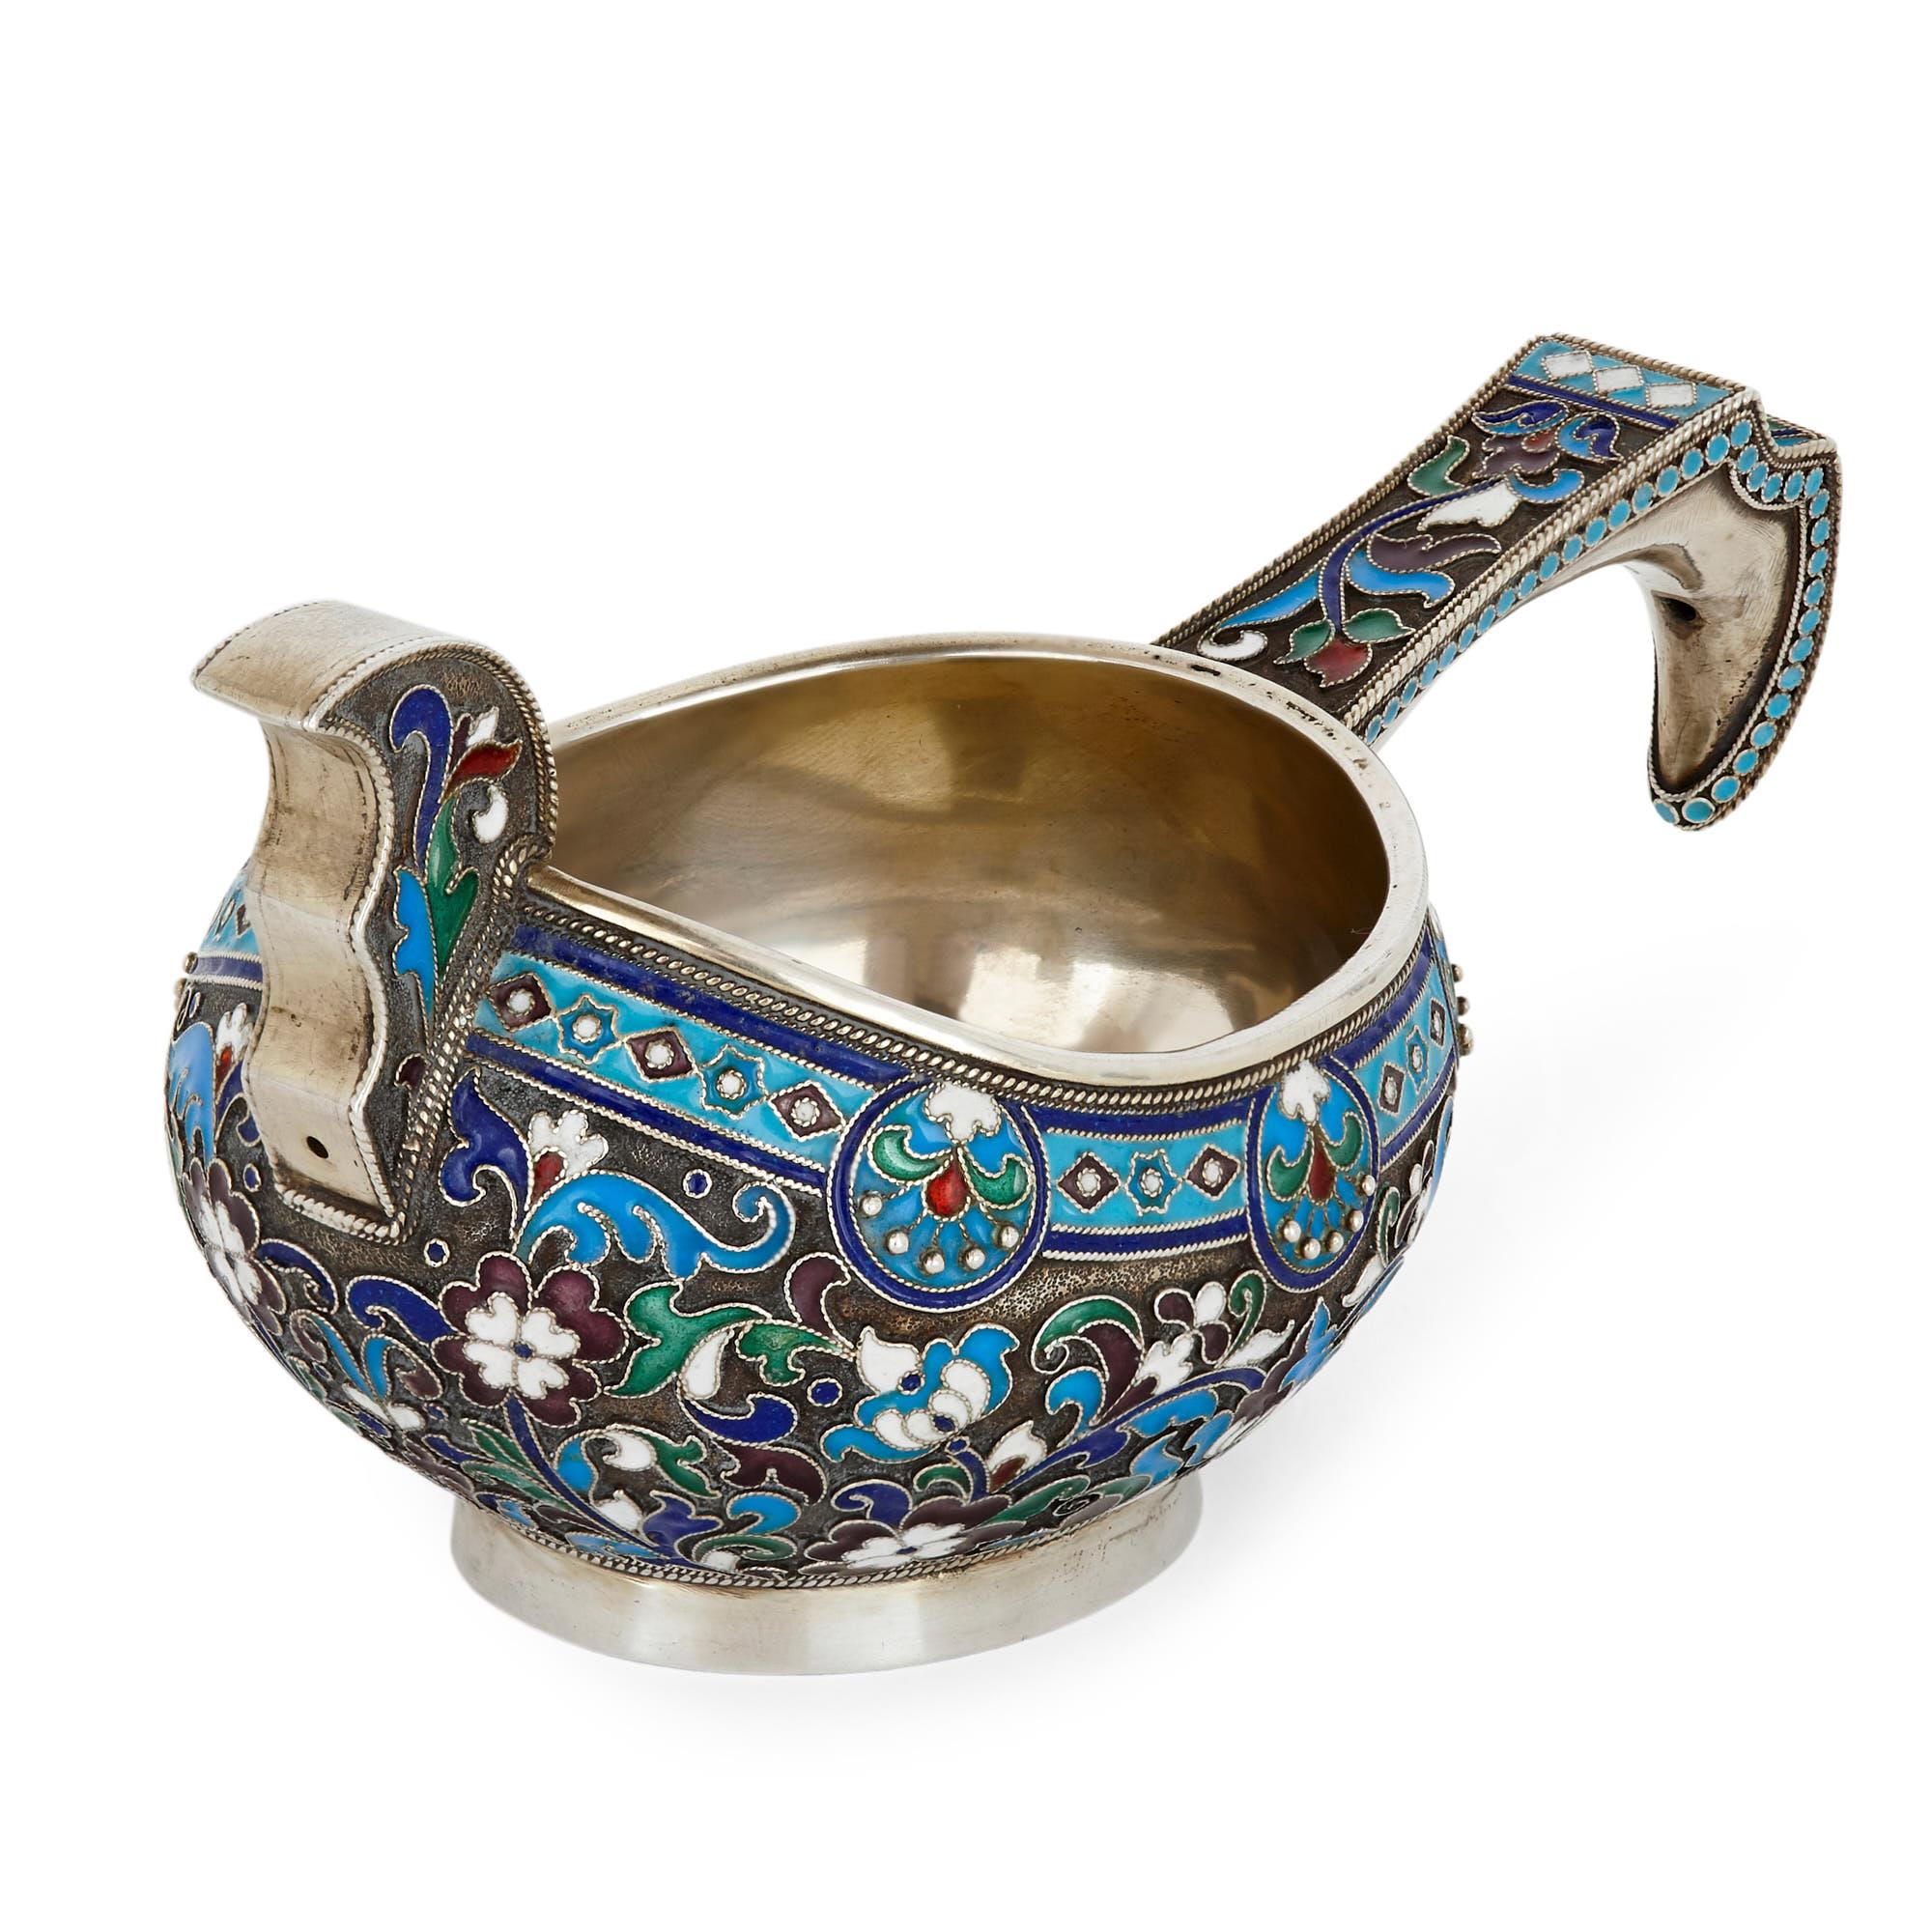 This wonderful Kovsh (an ornamental drinking vessel) was created at the start of the 20th century in Imperial Russia. Made of 875 grade silver, the Kovsh is of oval form and features a long handle and a mounted prow. The body of the Kovsh is